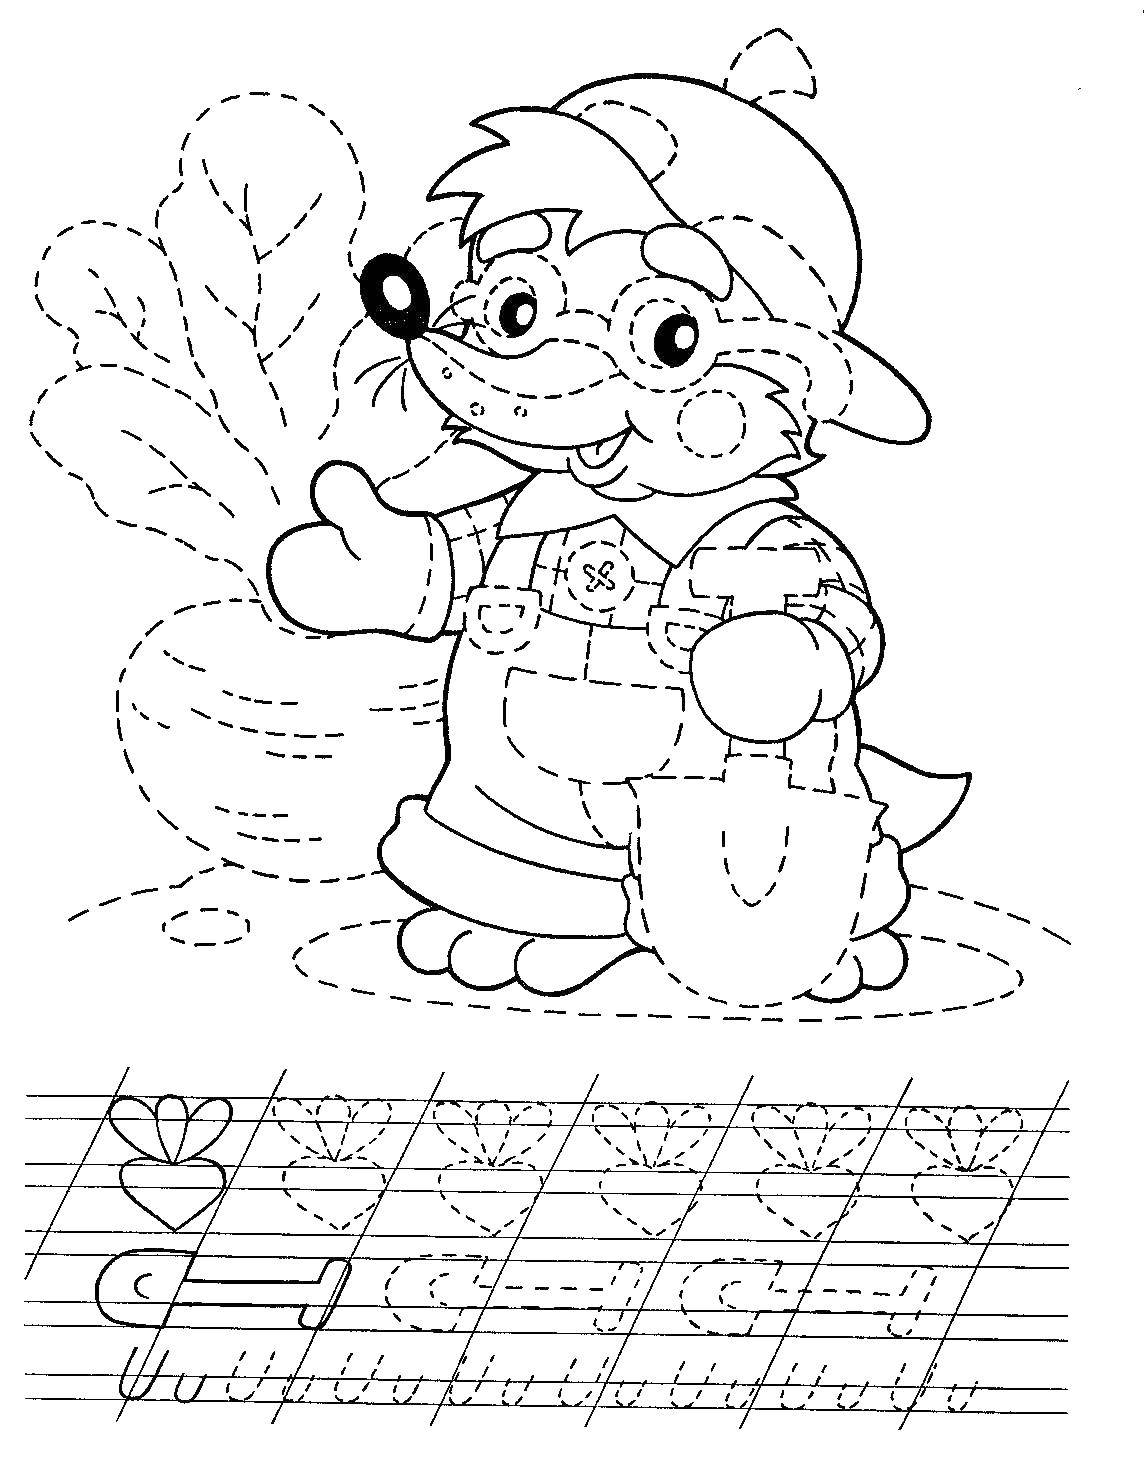 Coloring The thing with the mouse. Category school. Tags:  mouse, flower, spatula, recipe.